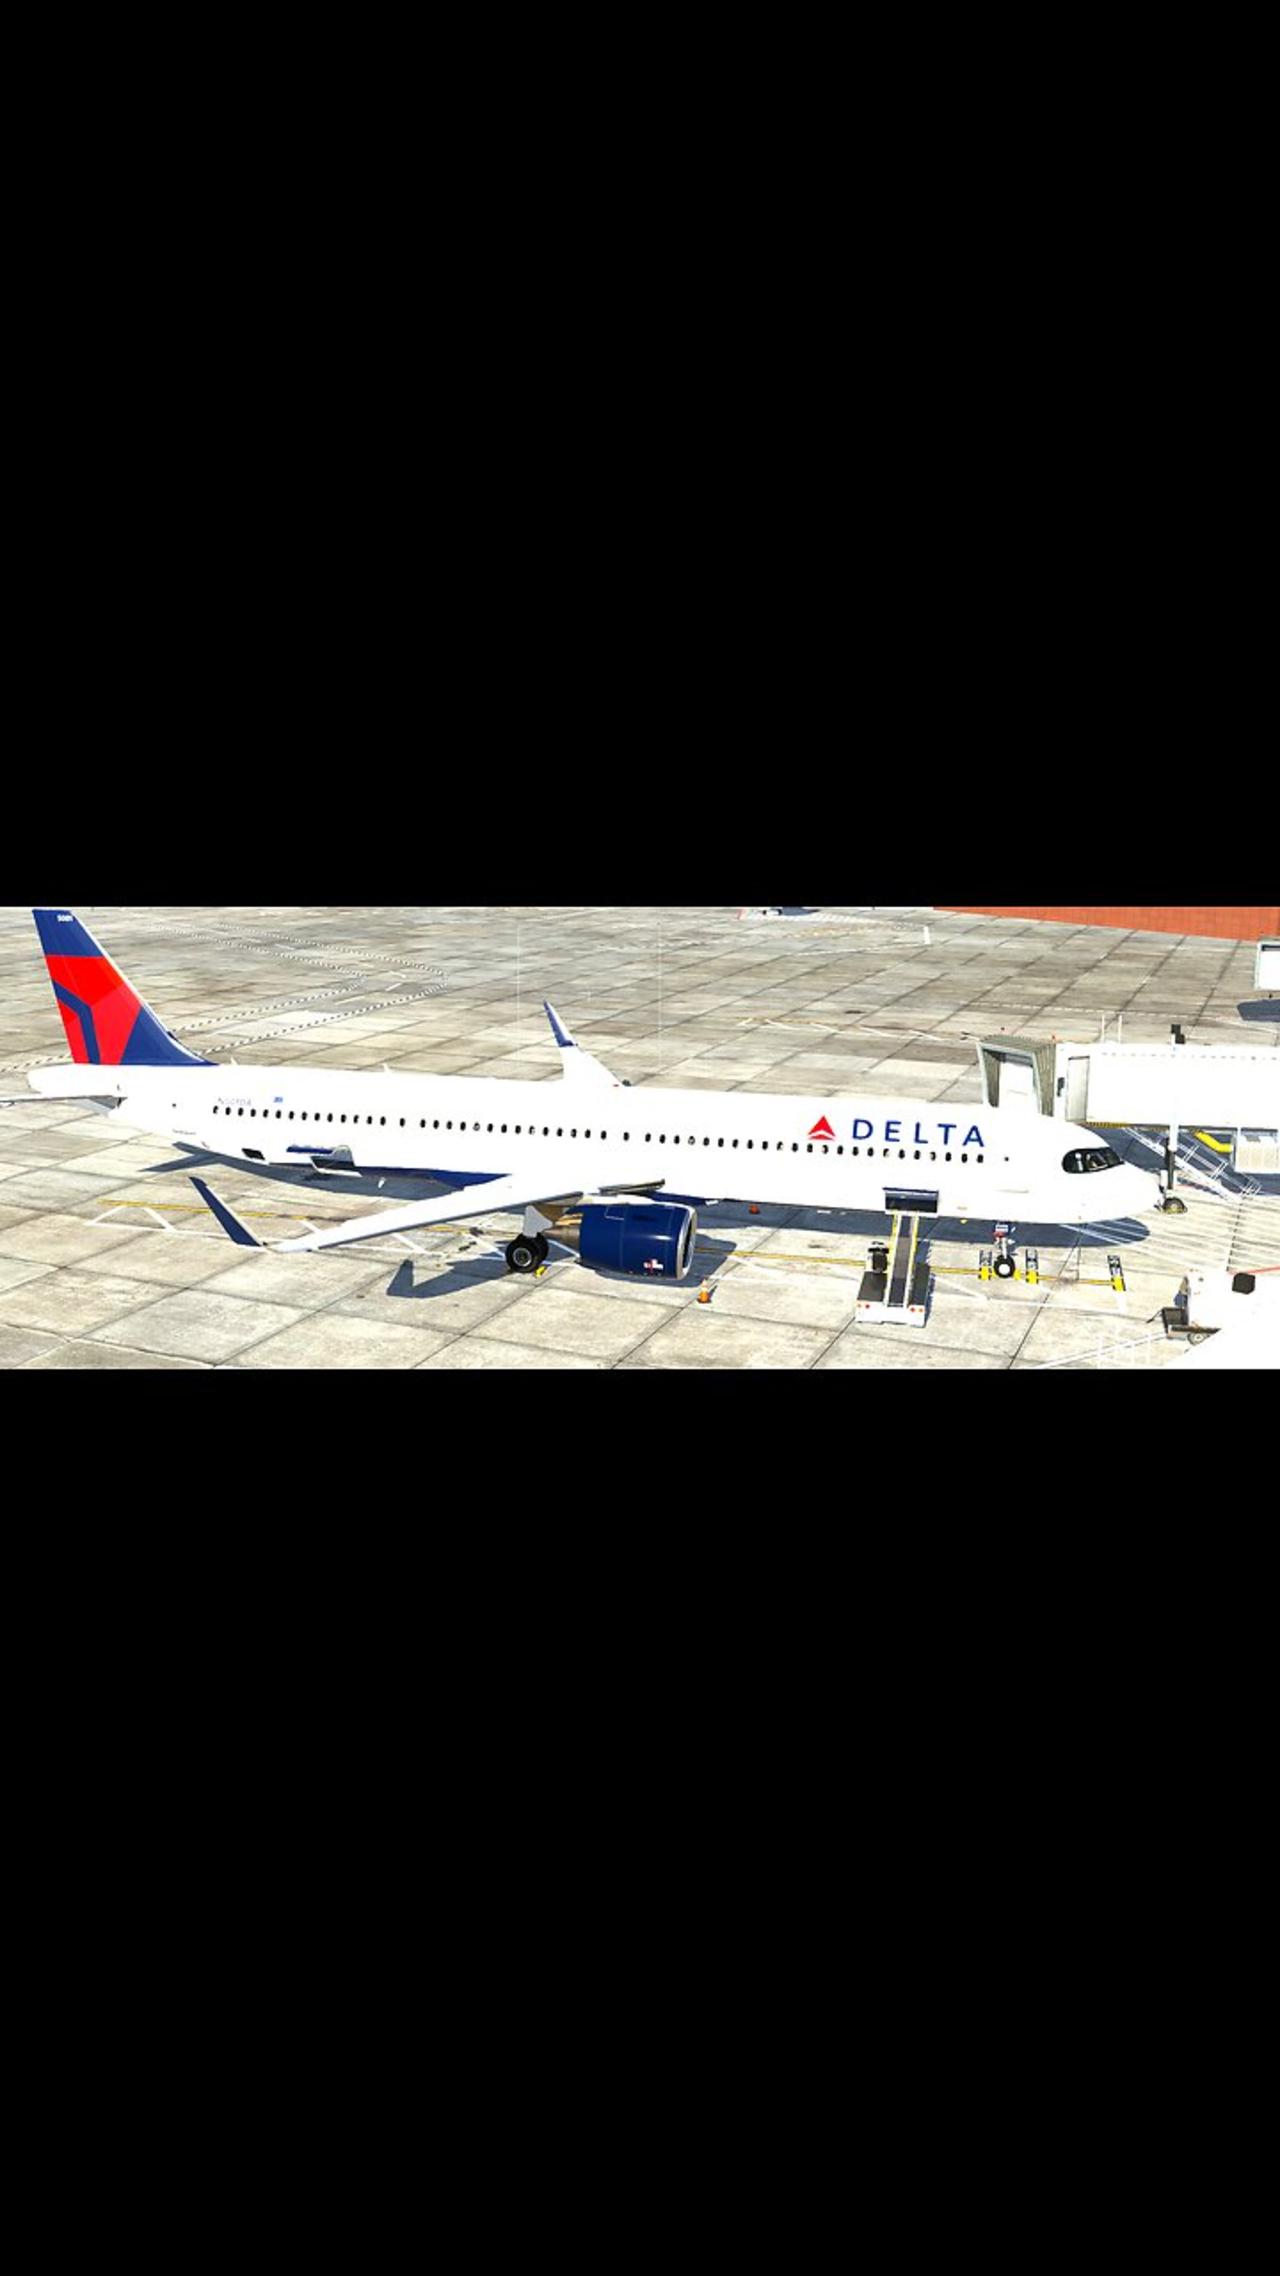 DELTA VIRTUAL Airlines  NASCAR TOUR Round 11: Philly connector